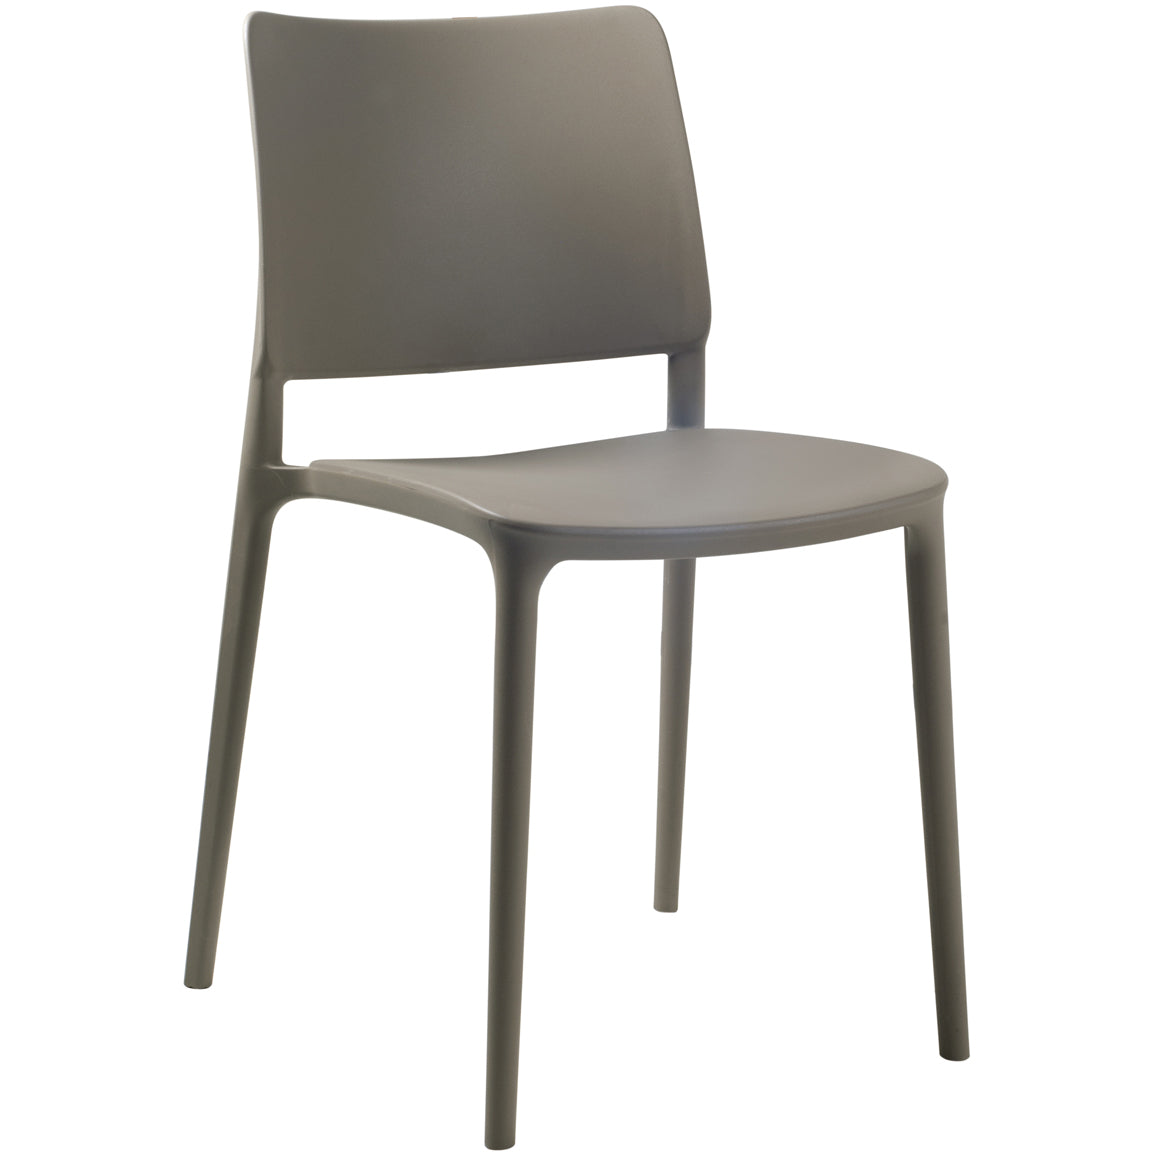 Cleo Patio Dining Chair in Taupe - (Set of 2)